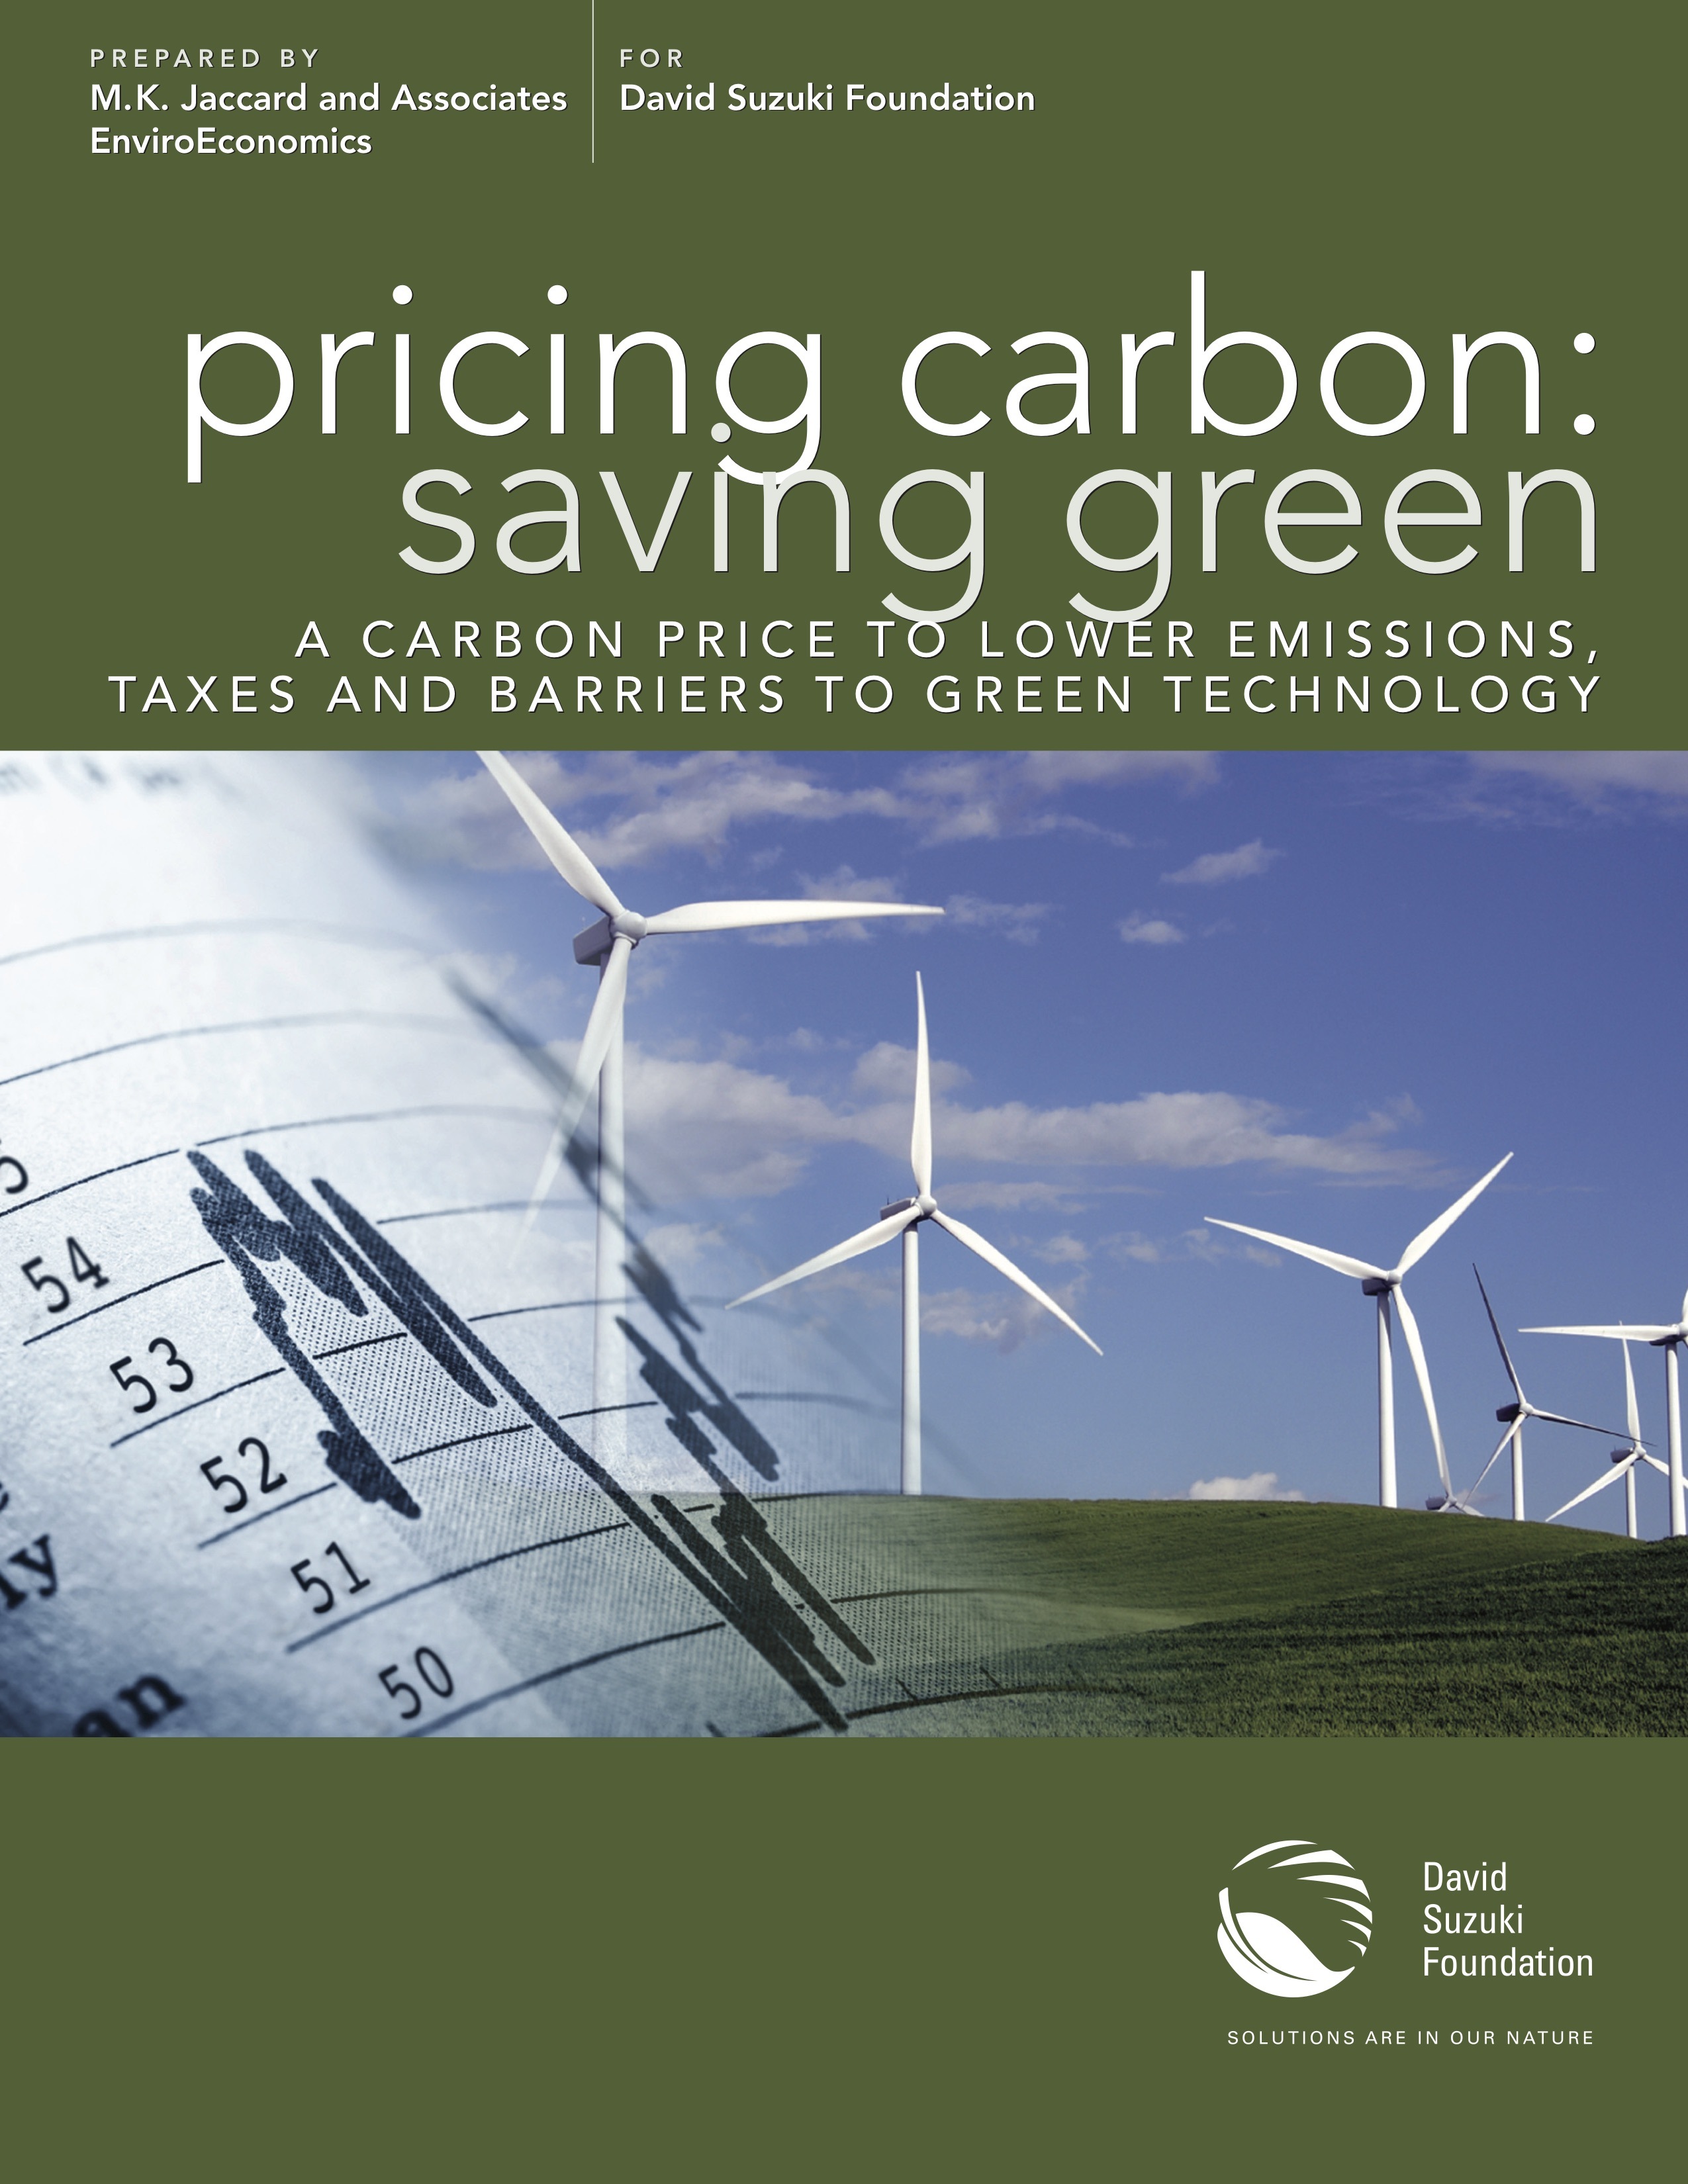 Pricing Carbon: Saving Green — A Carbon Price to Lower Emissions, Taxes and Barriers to Green Technology